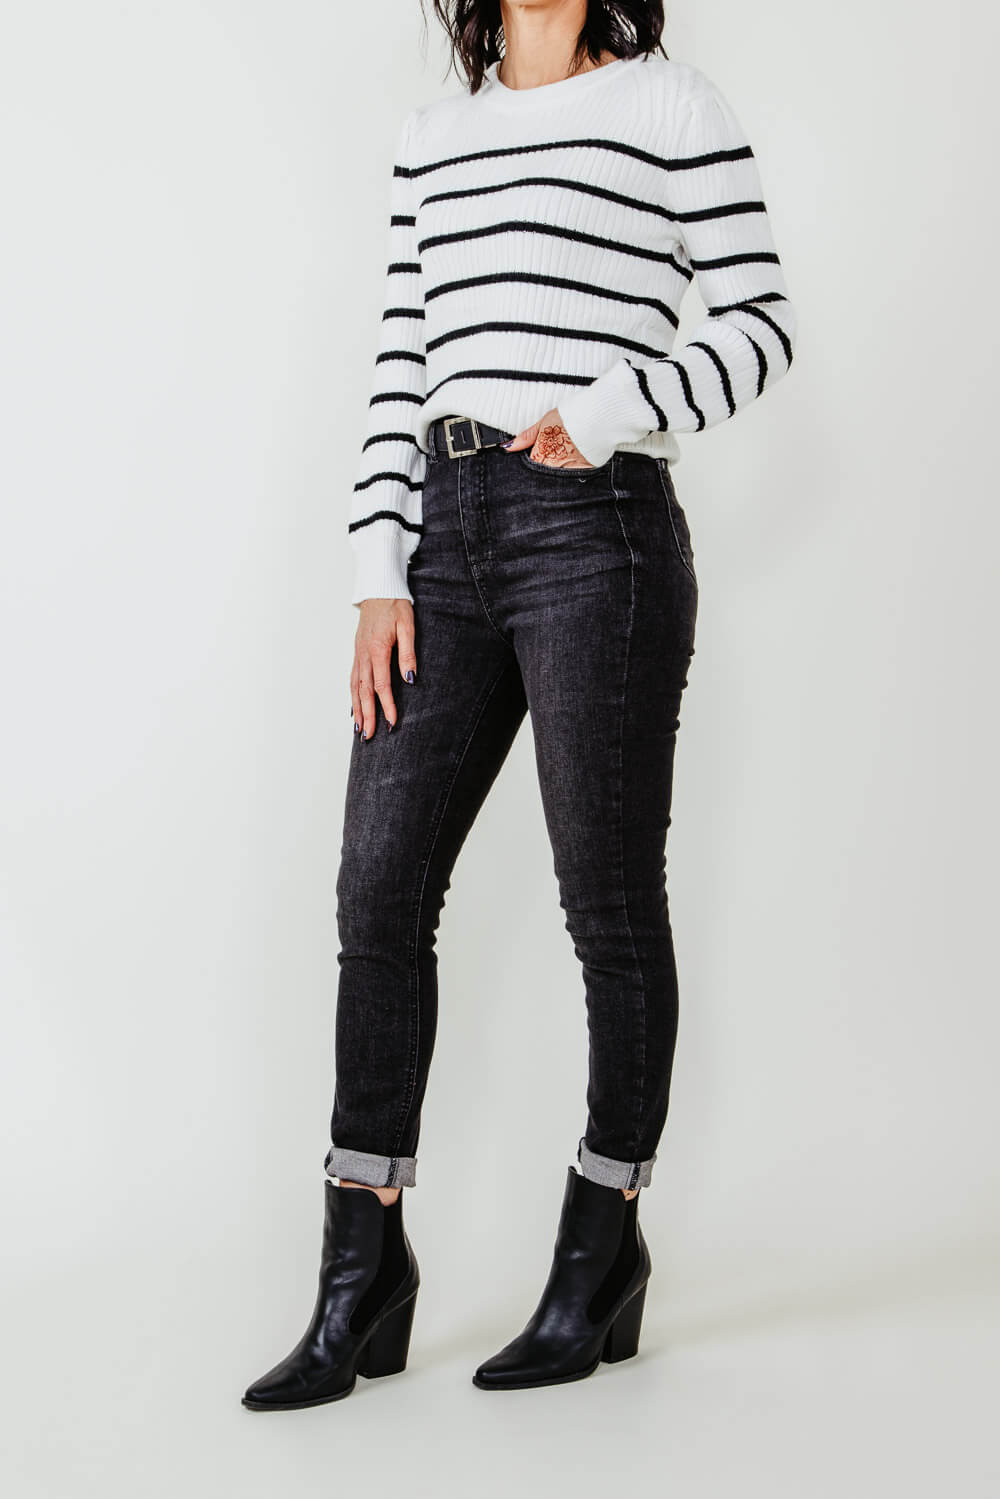 a new day Ankle Zip Skinny Jeans for Women